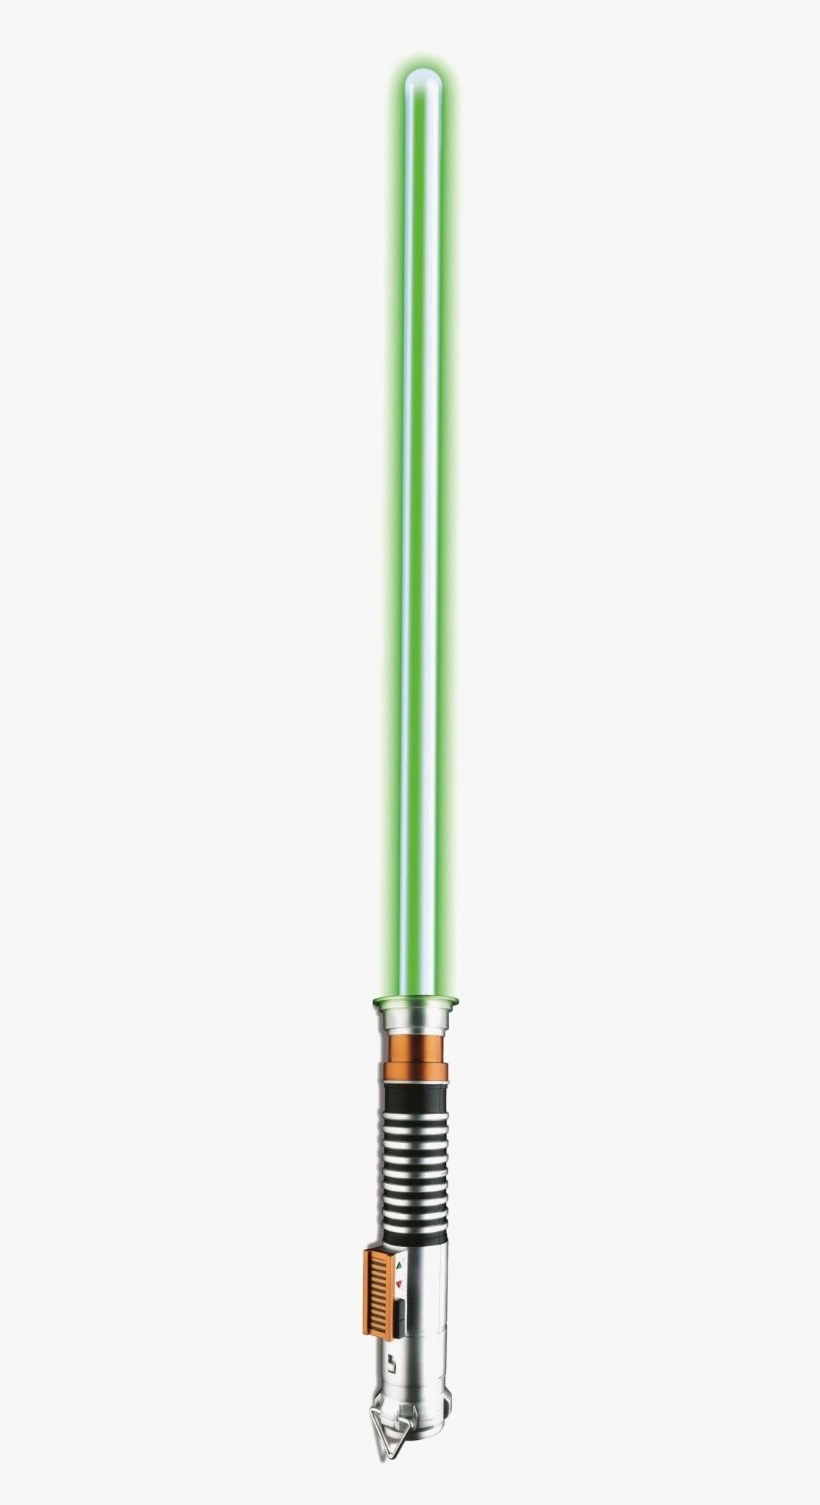 lightsaber clipart proposed green